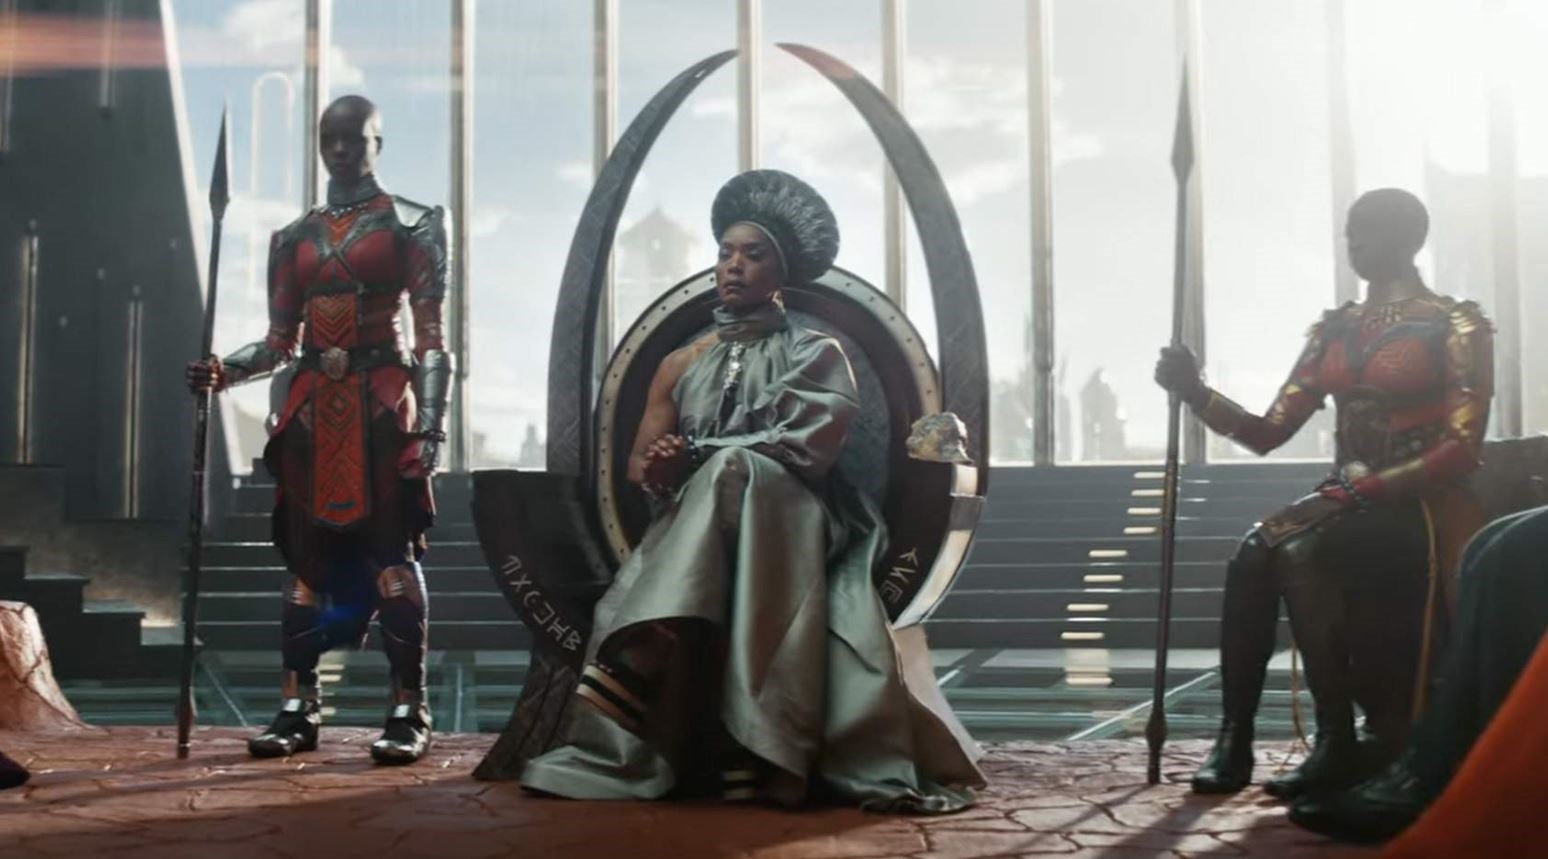 Image for Black Panther: Wakanda Forever